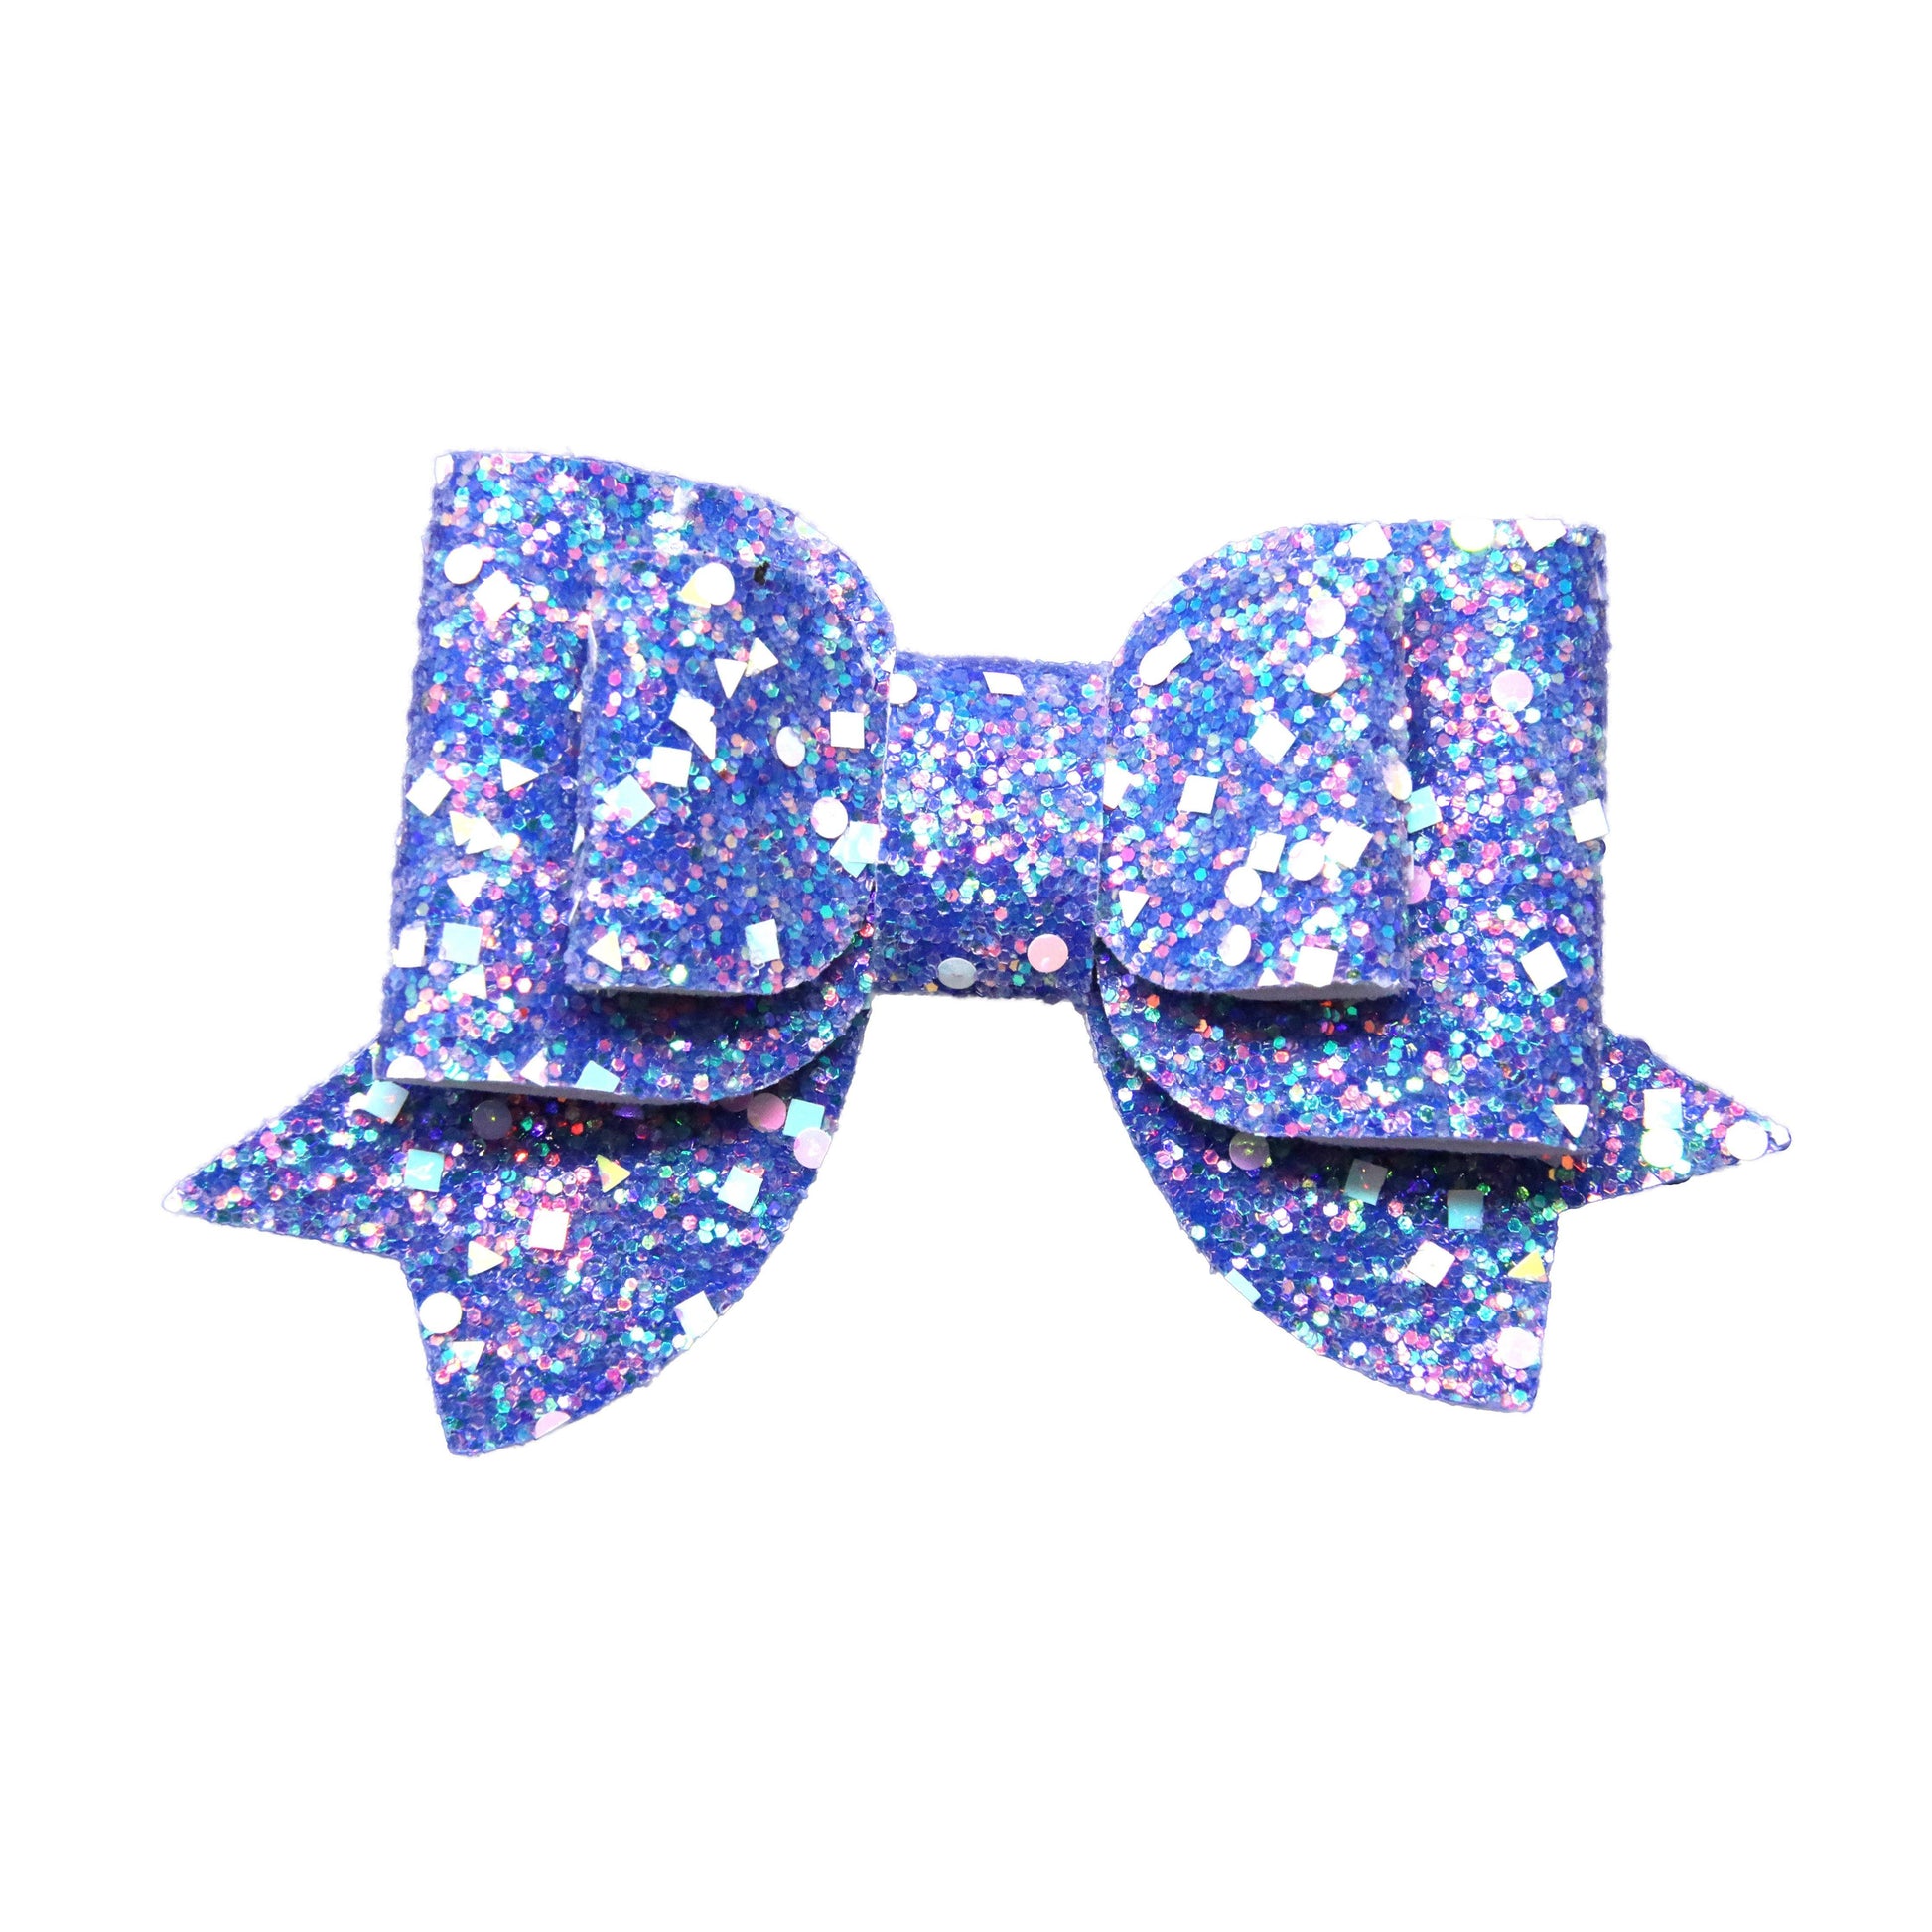 3.5 inch Glow-in-the-dark Violet Glitter Double Maggie Bow